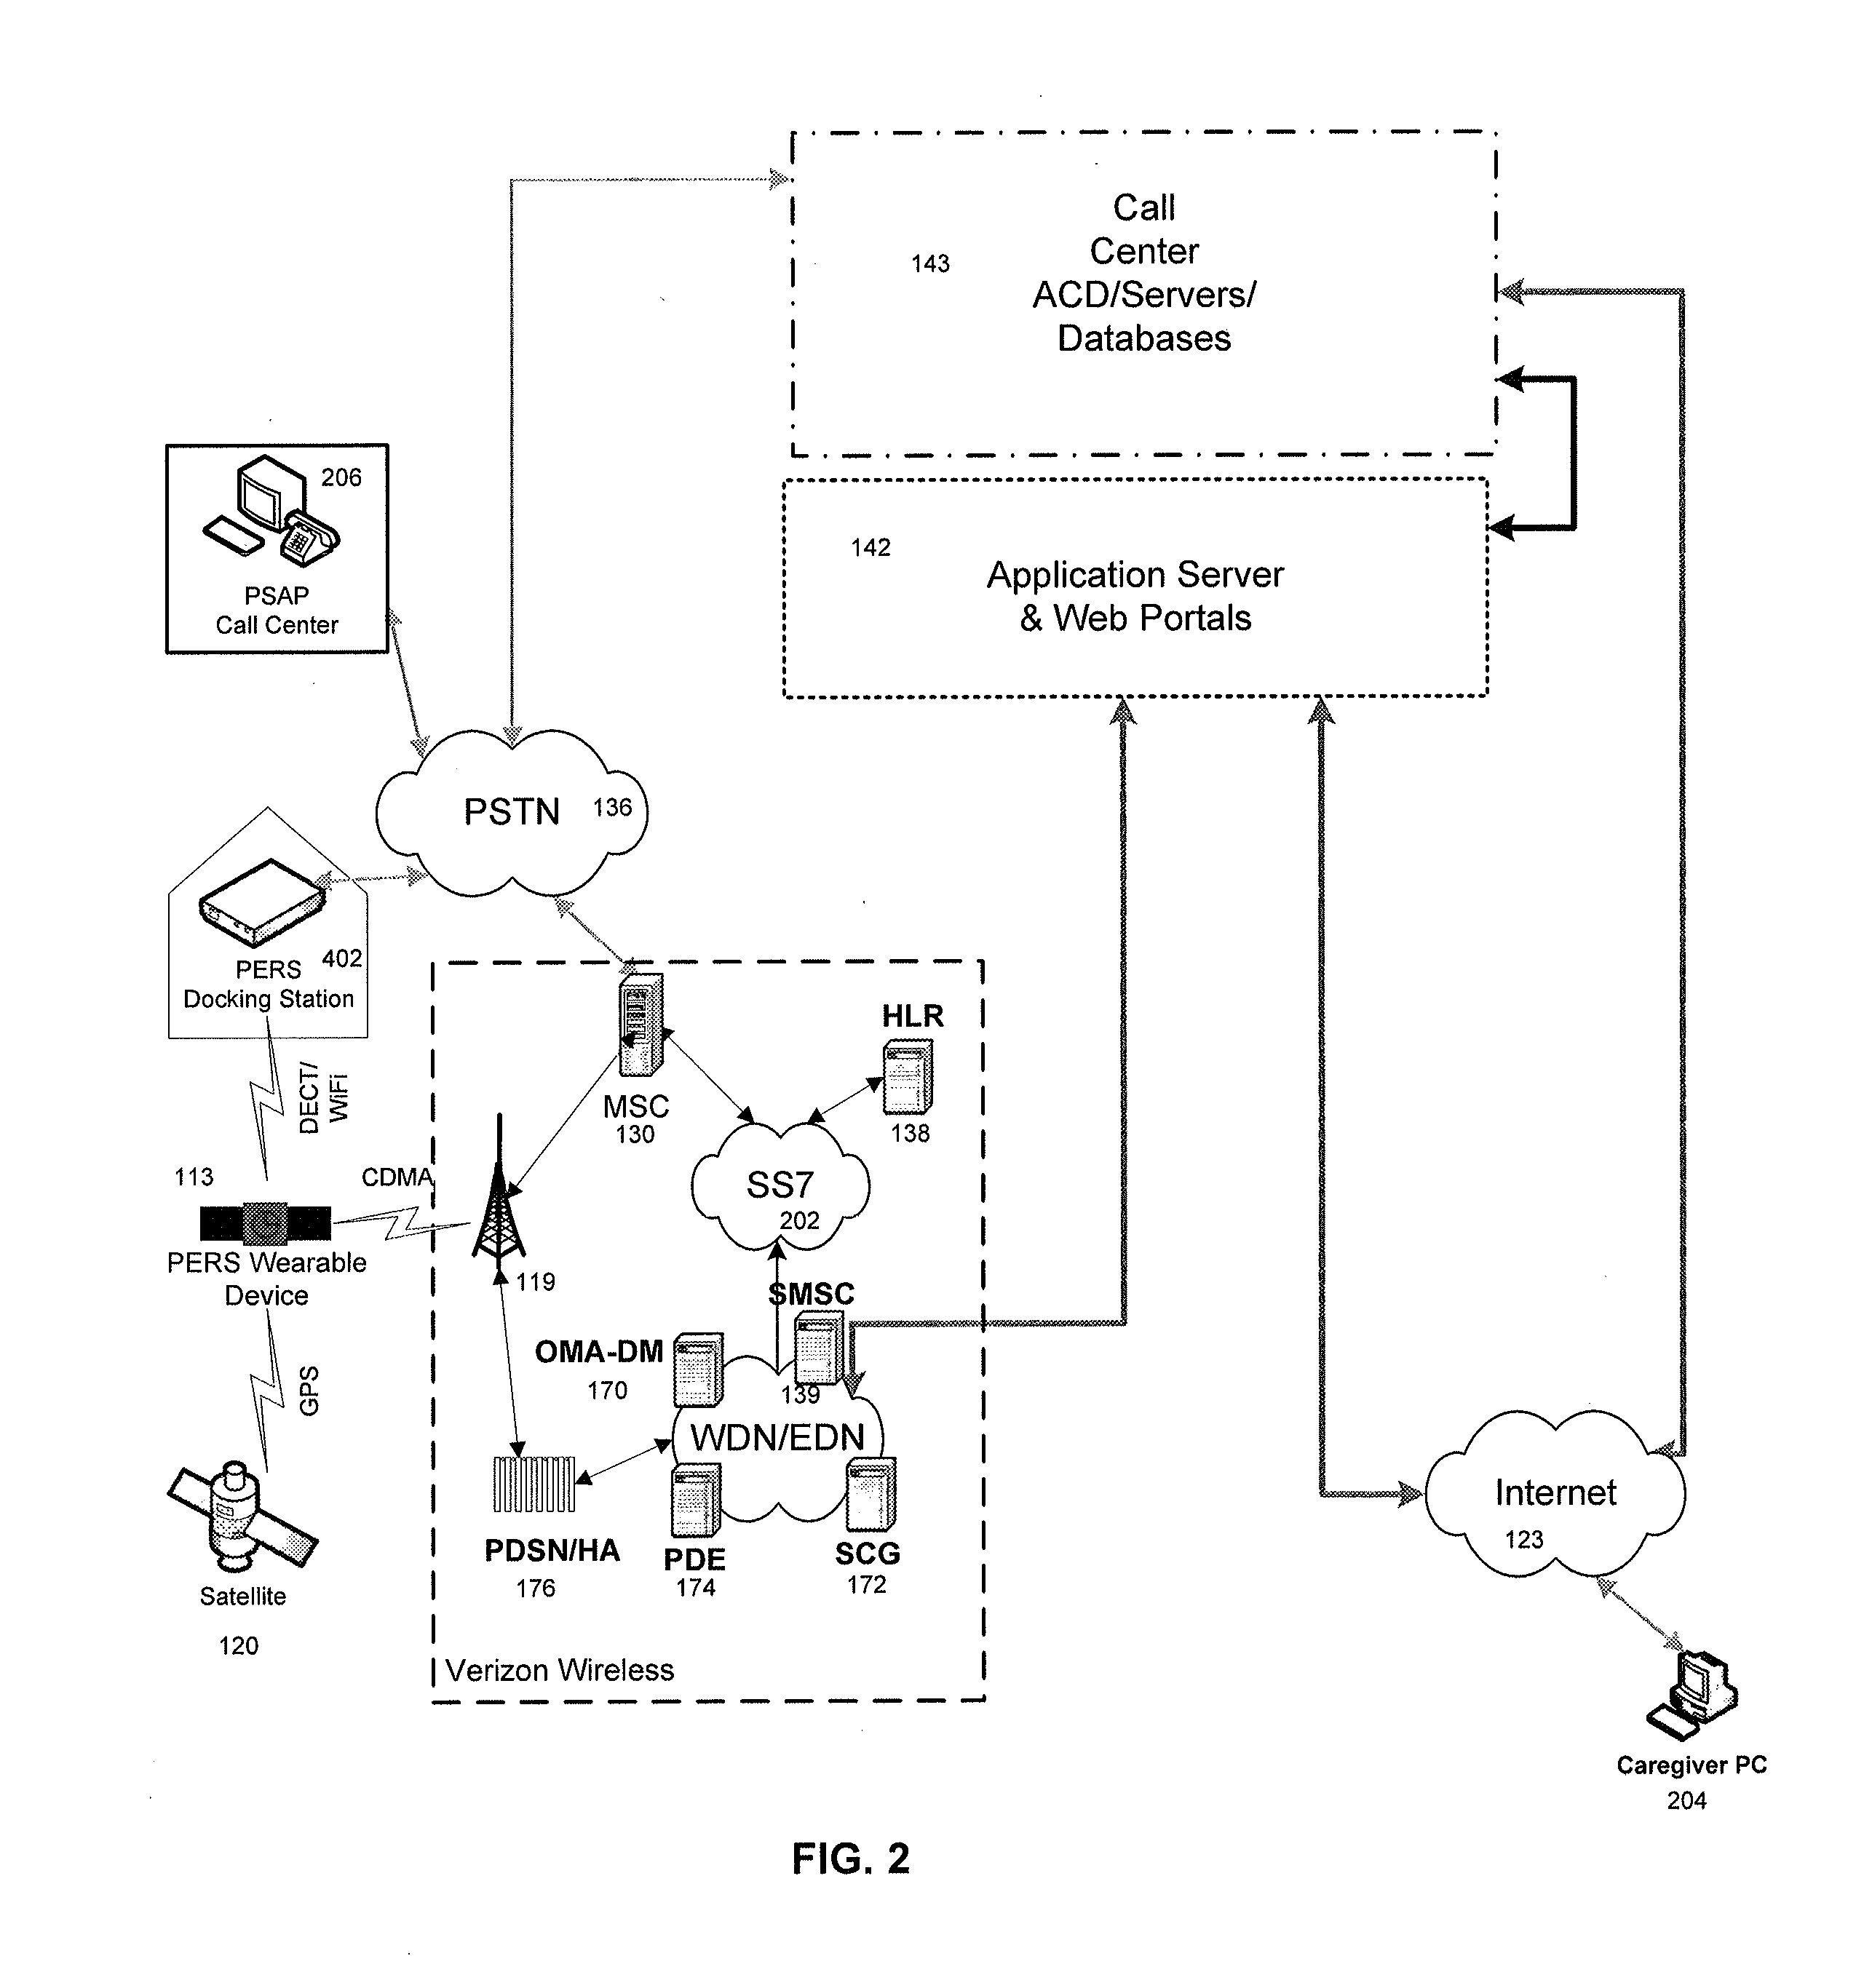 Mobile device smart button that adapts to device status